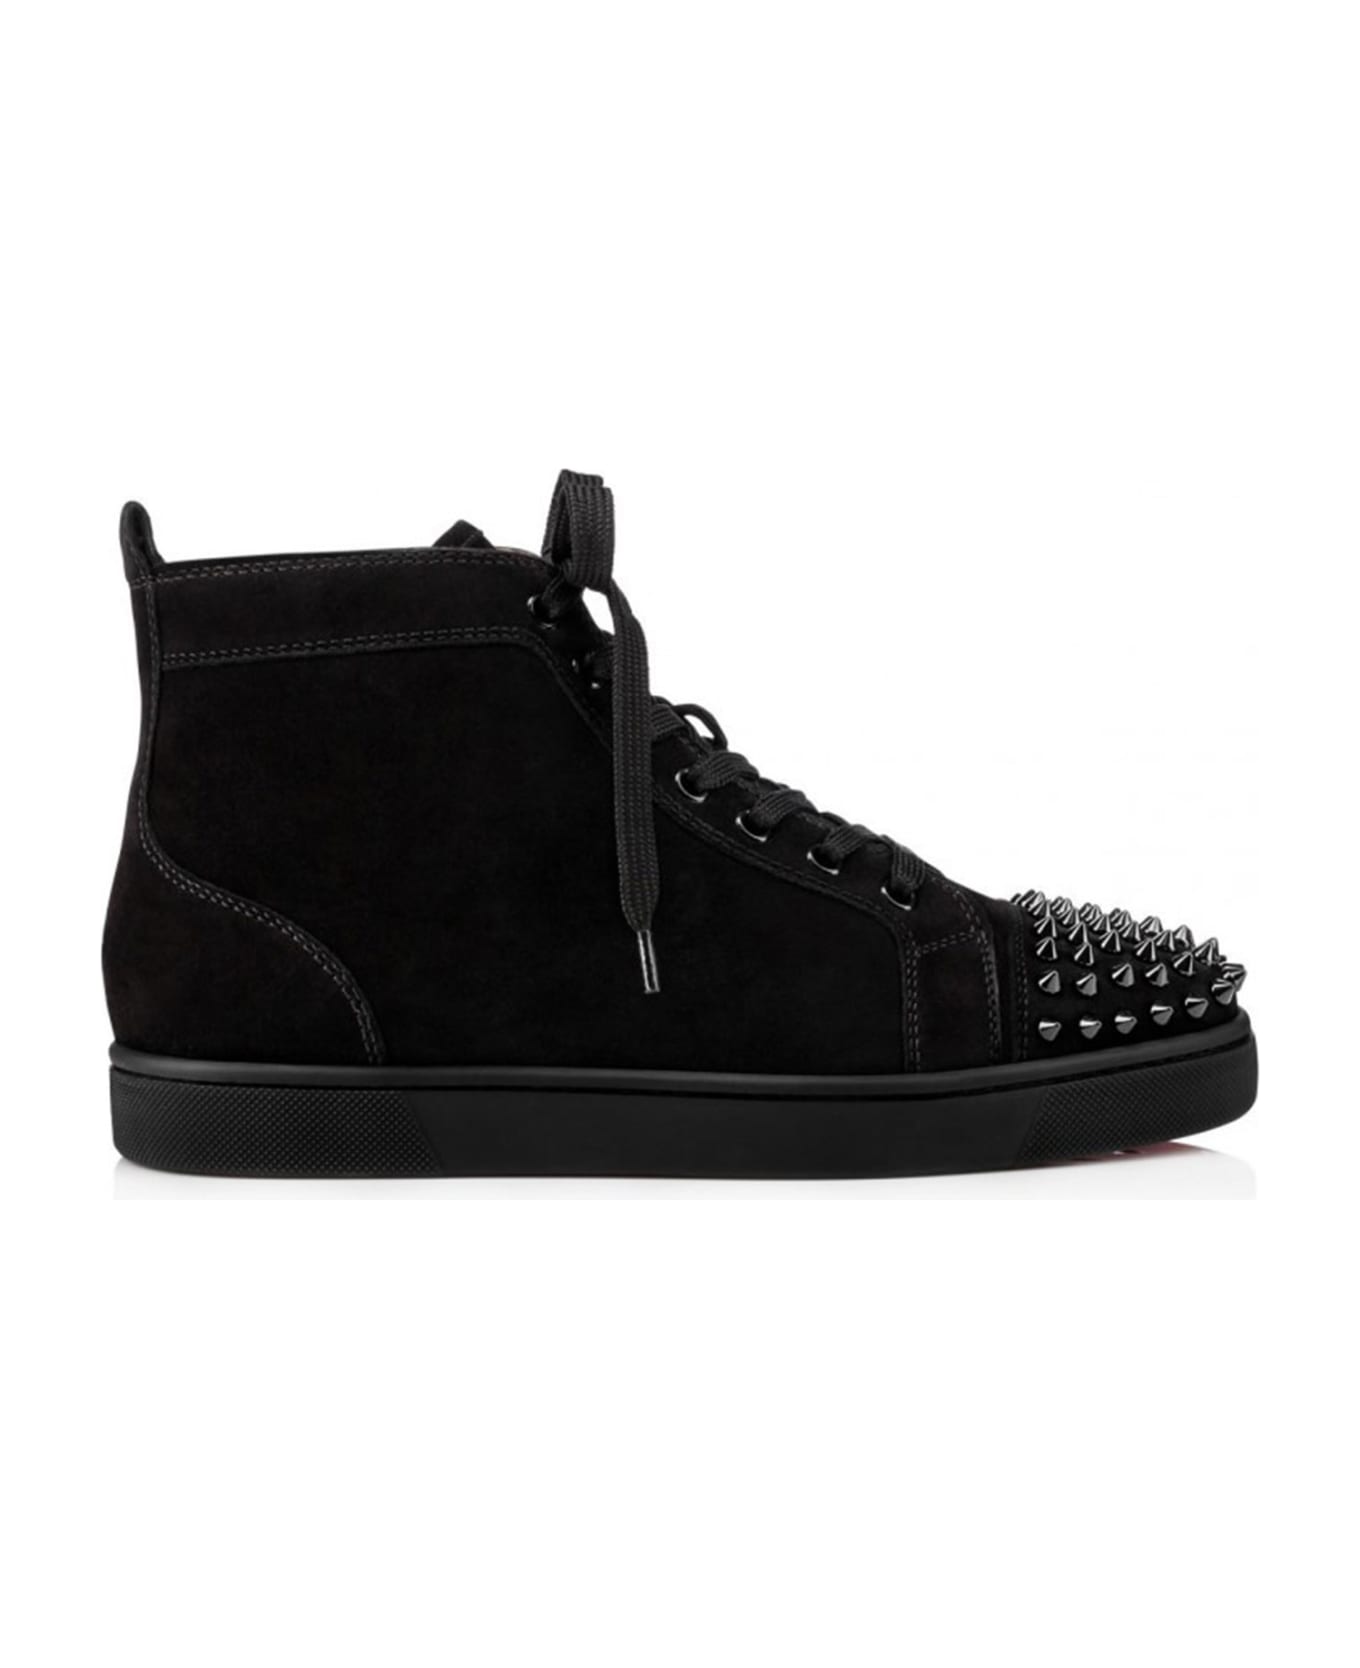 Christian Louboutin High-top Sneakers In Suede With Spikes - Black/black/bk スニーカー